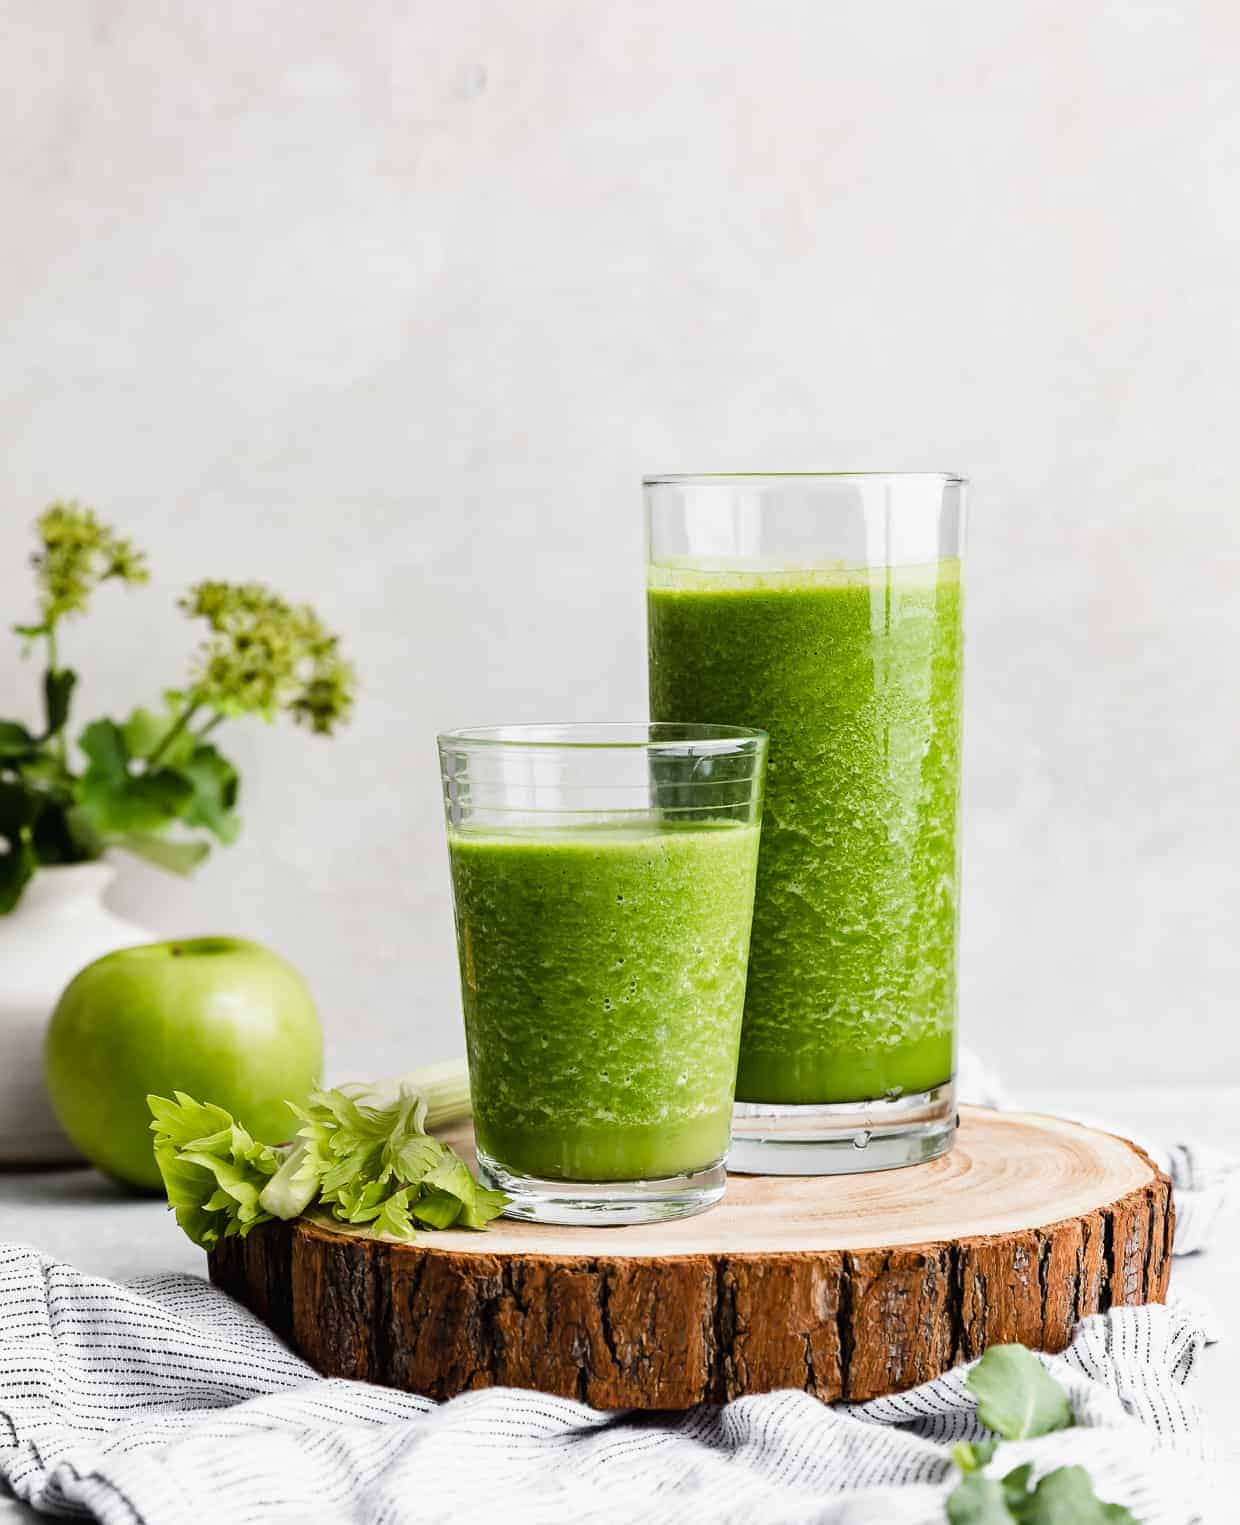 Two glasses full of dark green celery smoothie on a wooden round board.